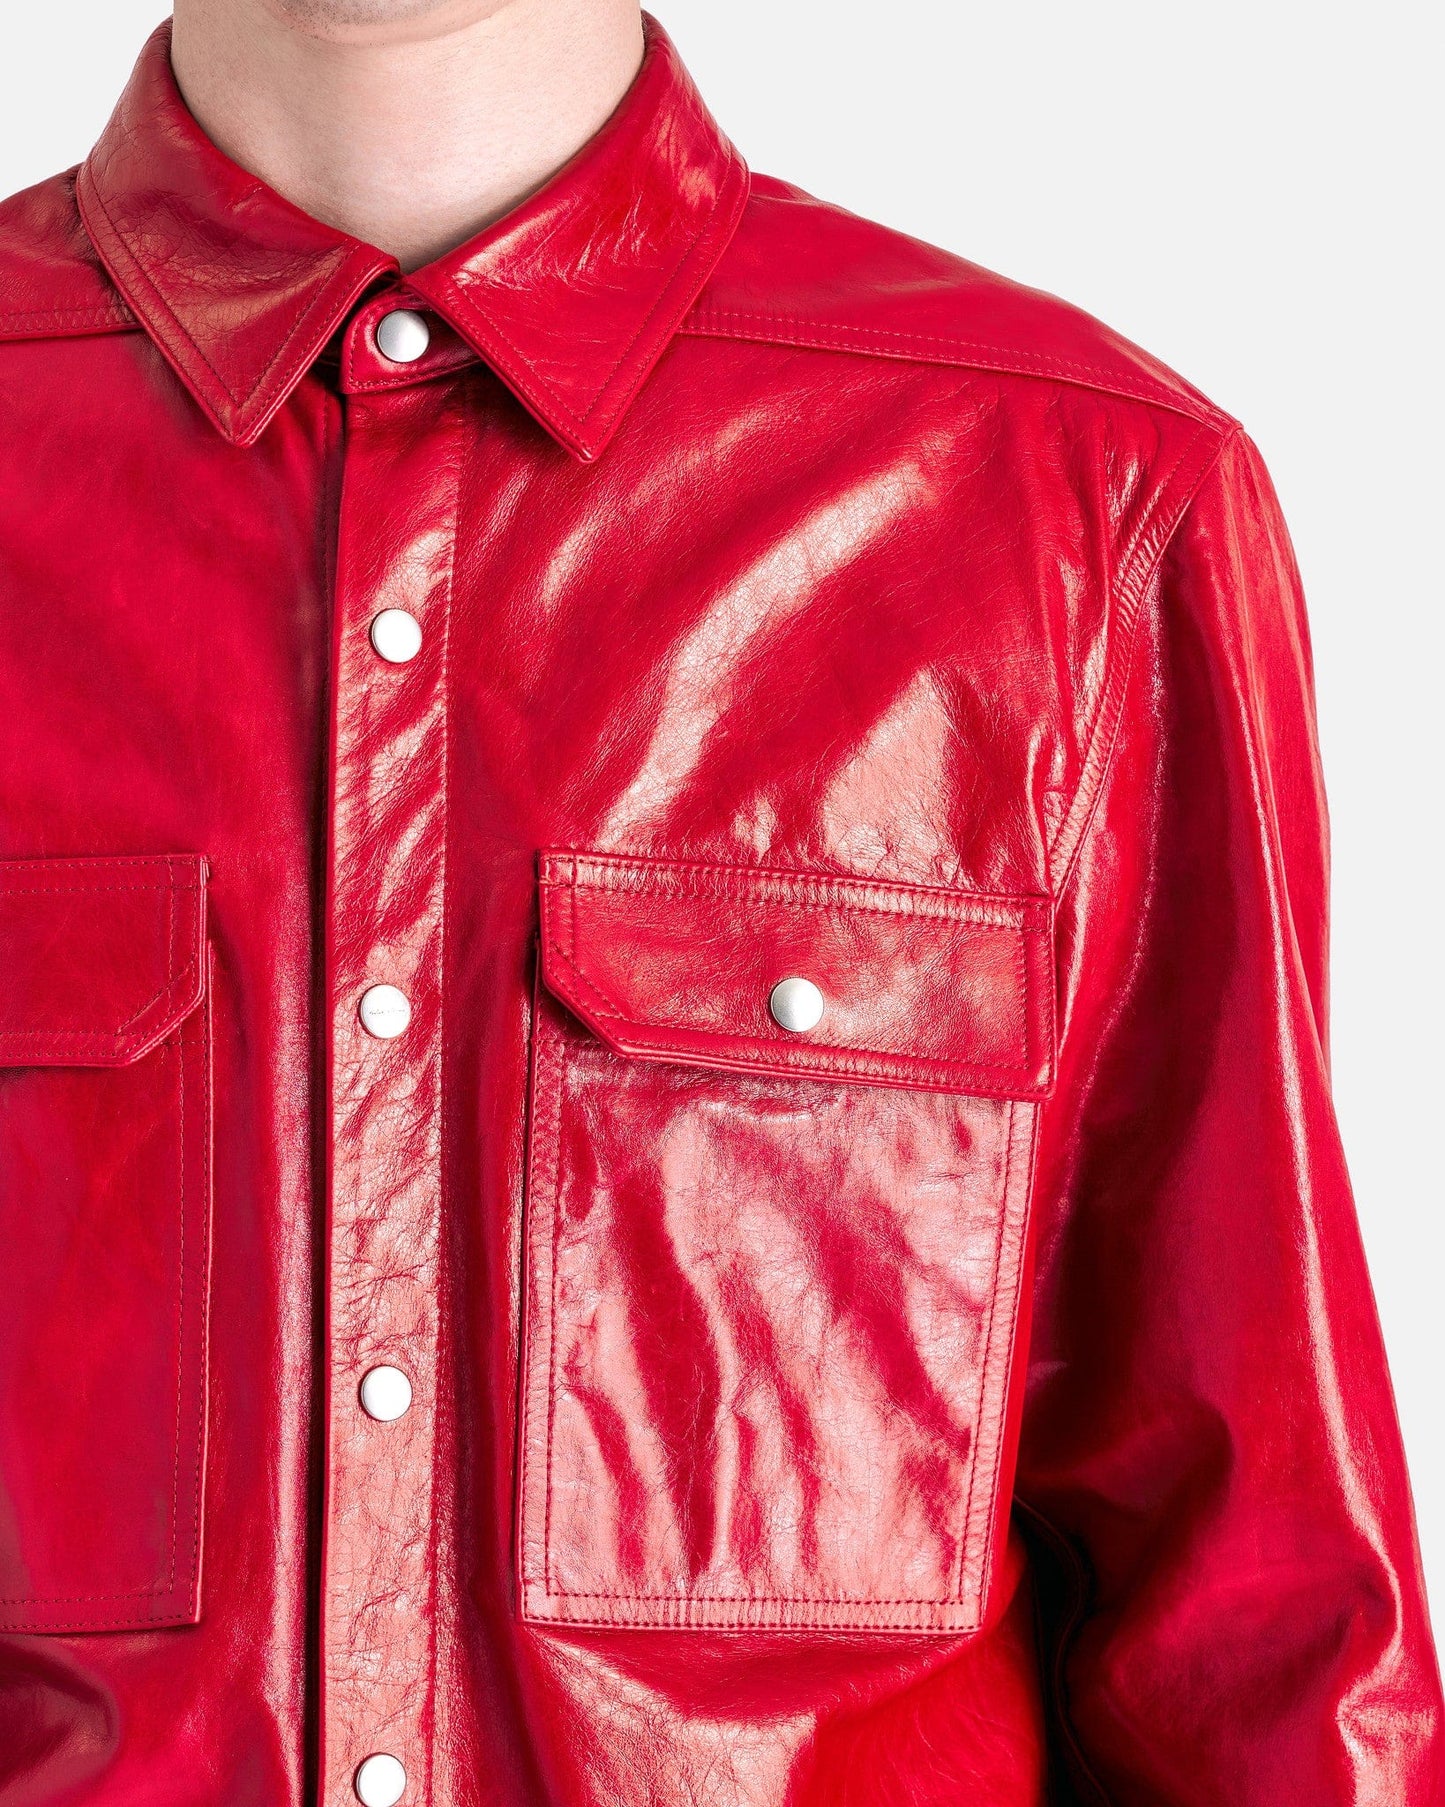 Rick Owens Men's Jackets Leather Outershirt in Cardinal Red